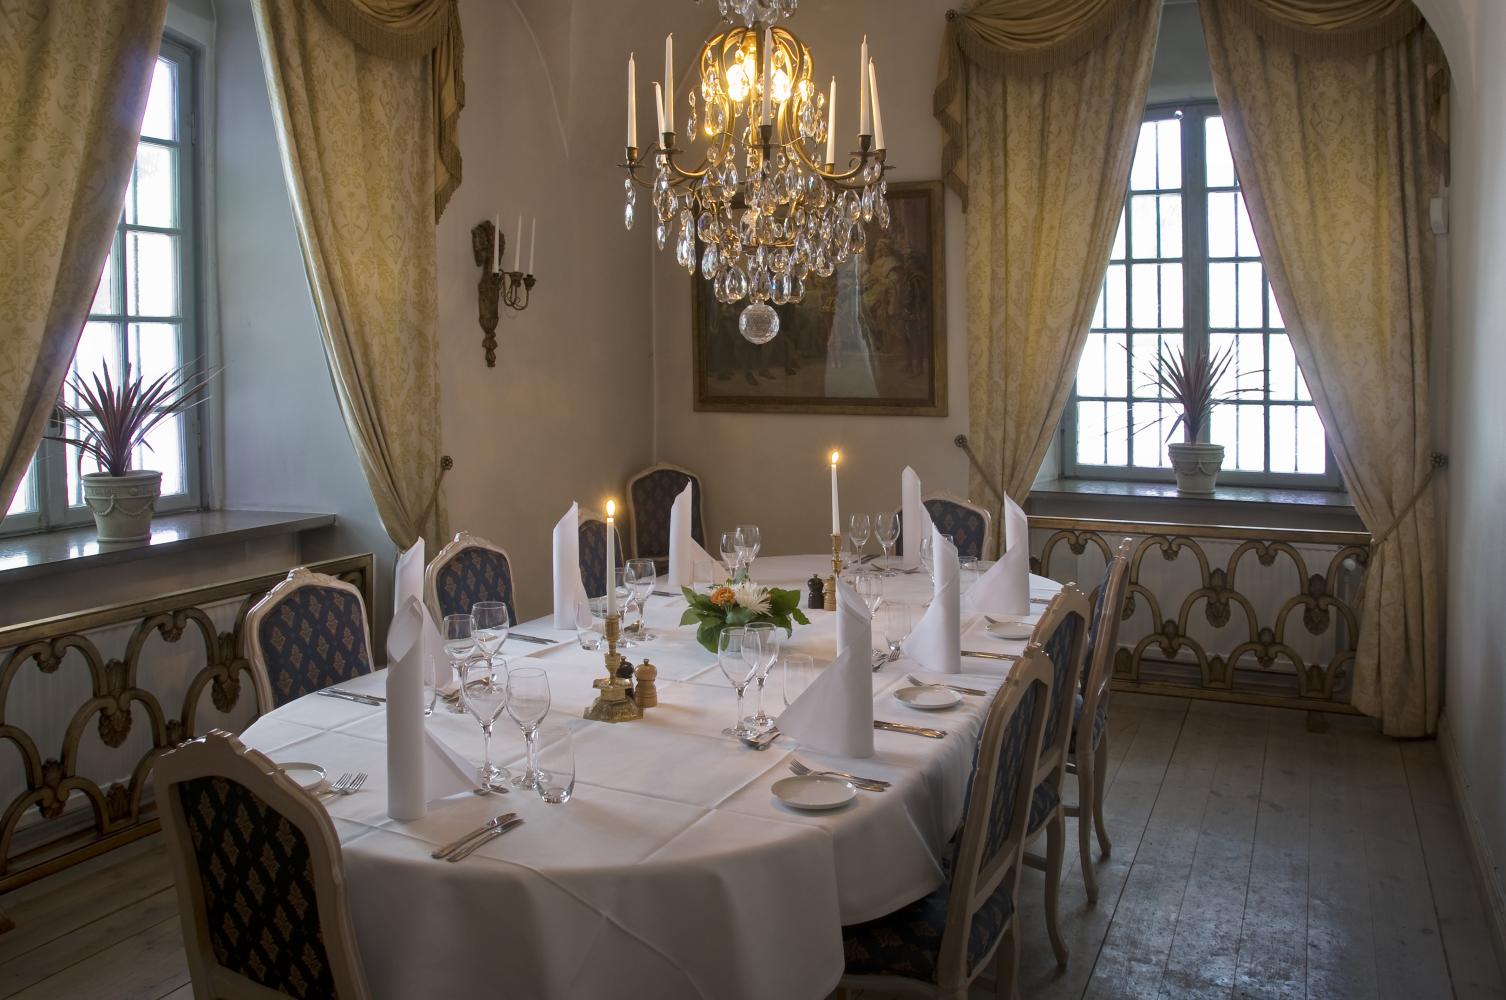 The Golden dining room at Häringe Palace